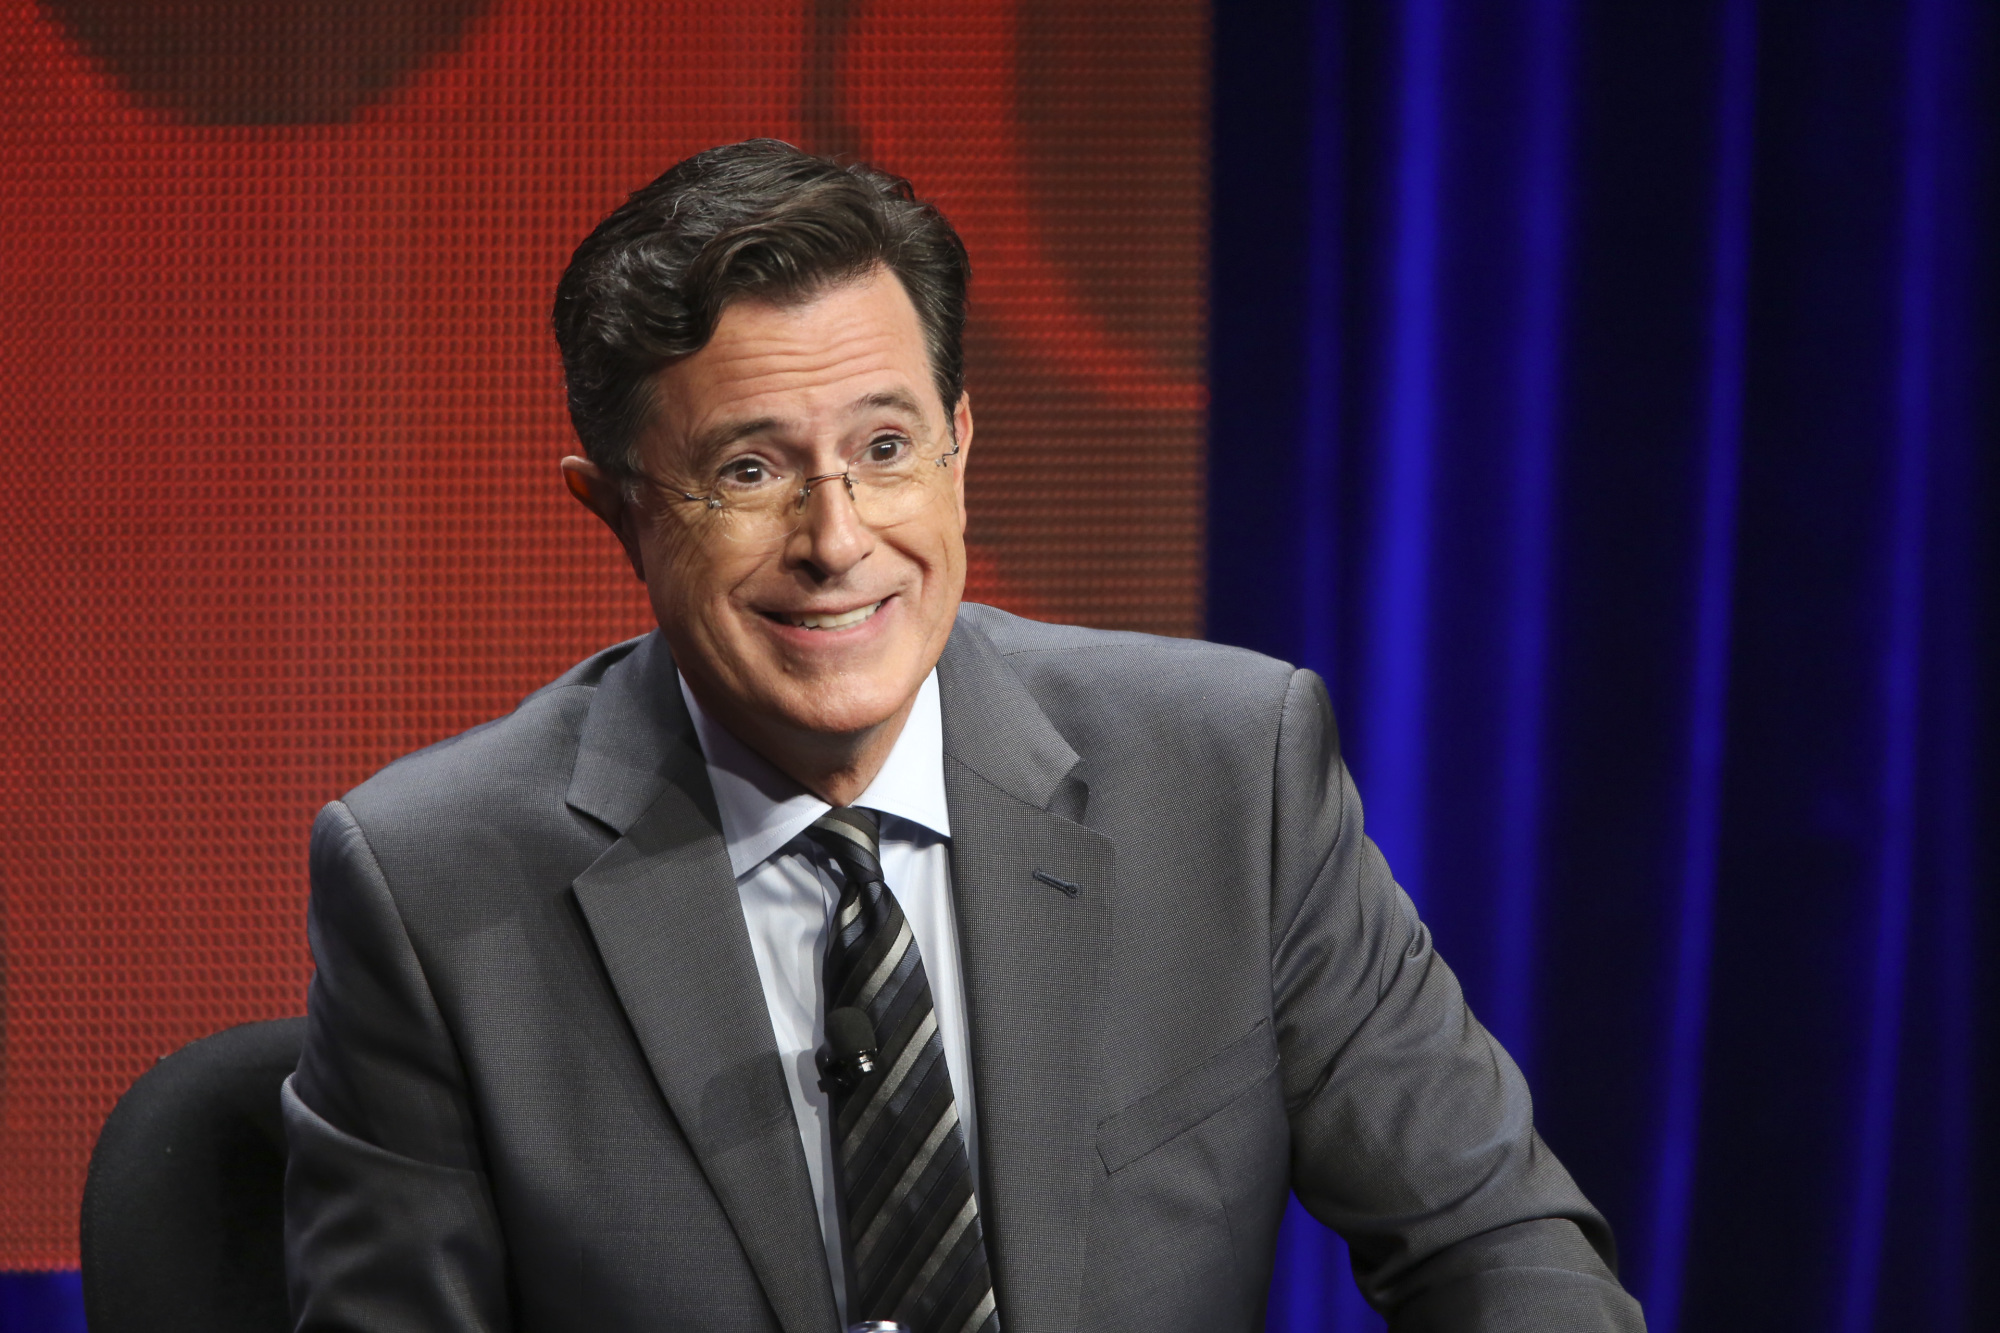 Stephen Colbert at the TCA Summer Press Tour 2015 in Los Angeles on Aug. 10, 2015. (Monty Brinton—CBS via Getty Images)